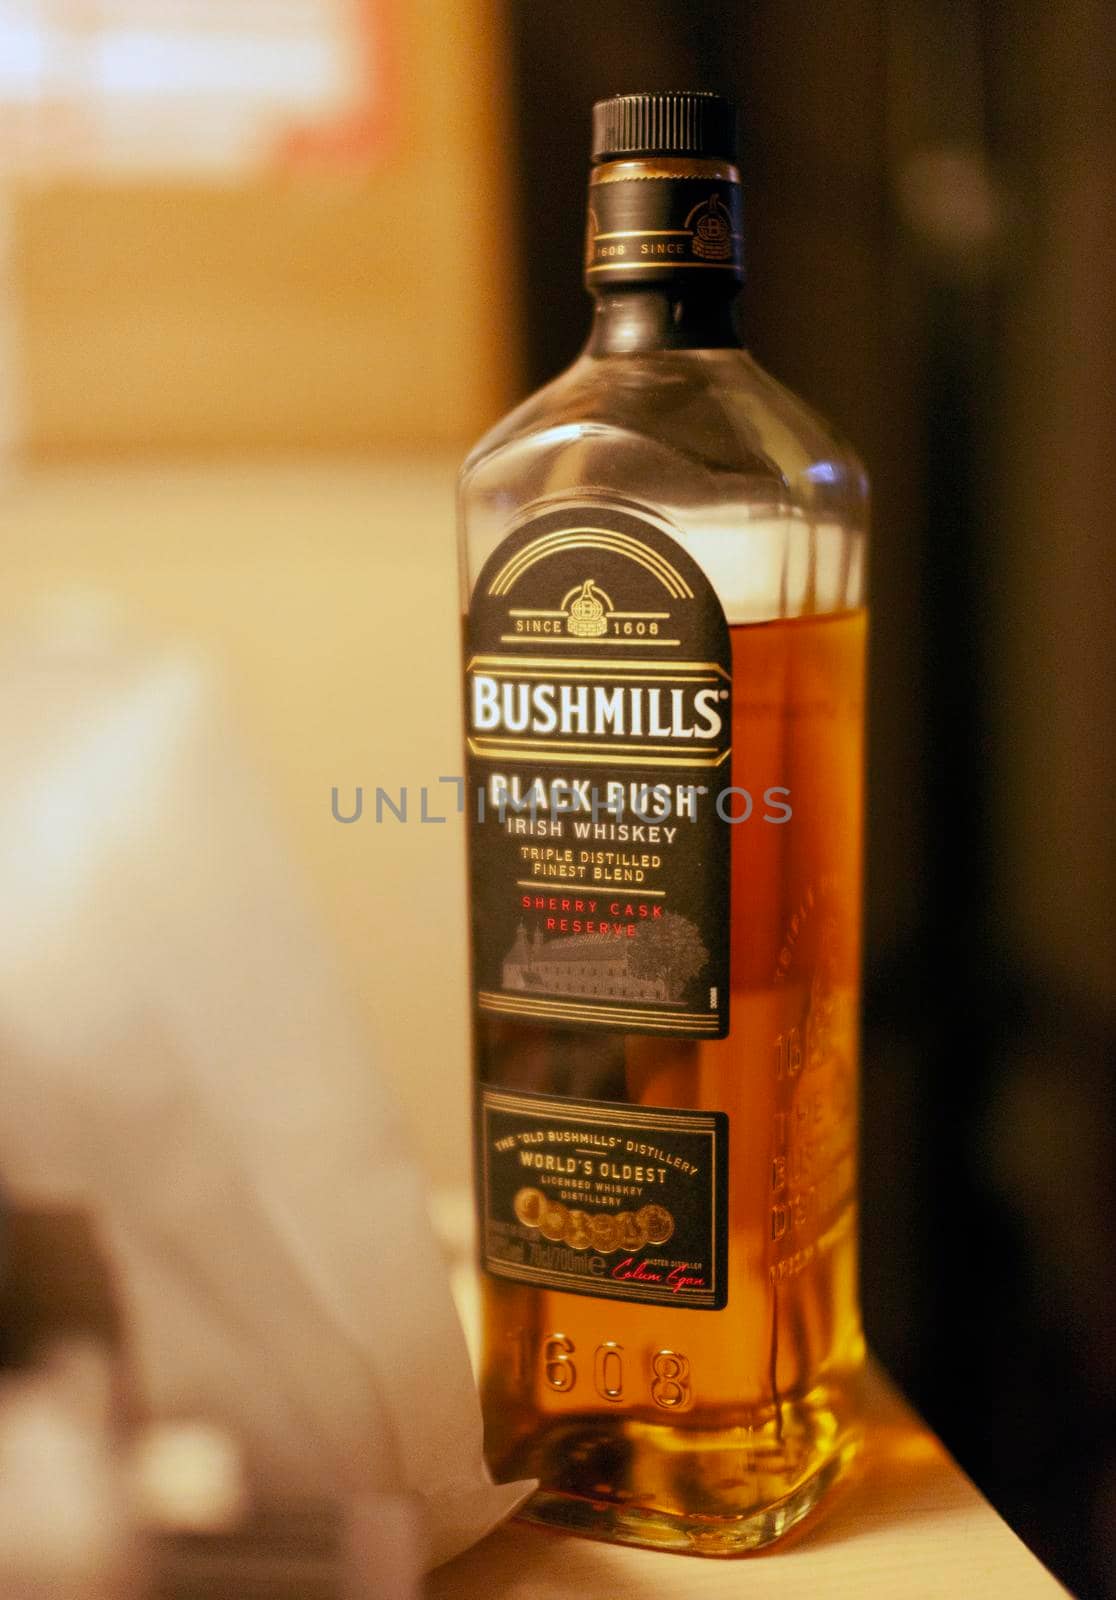 CHISINAU, MOLDOCA - FEBRUARY 19, 2021: Bottle of Bushmills Original Irish whiskey, product of Old Bushmills Distillery founded in 1608, today owned by Casa Cuervo. Concept photo